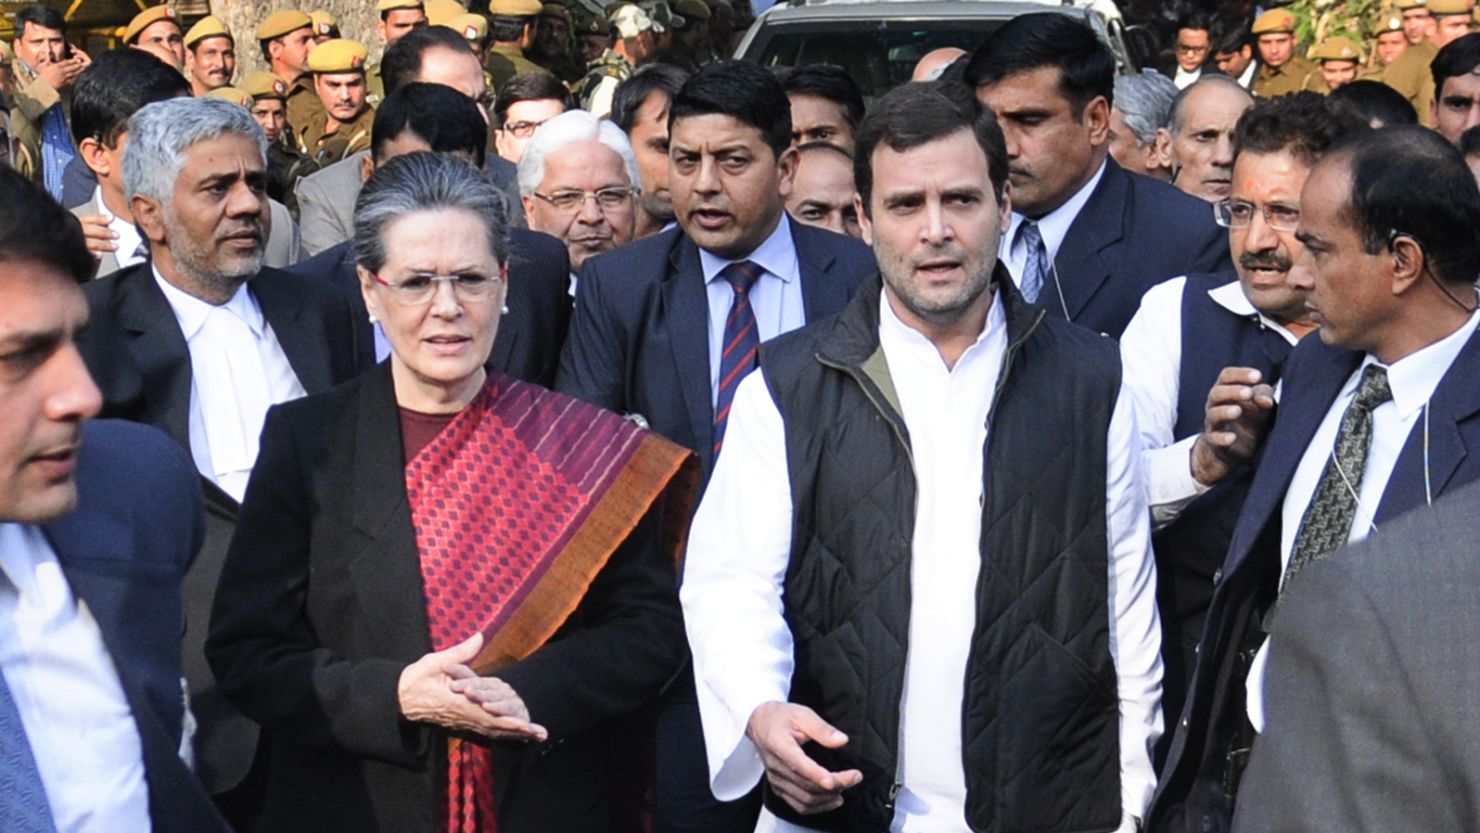 Congress party president Sonia Gandhi and her son Rahul Gandhi leave court after being granted bail.